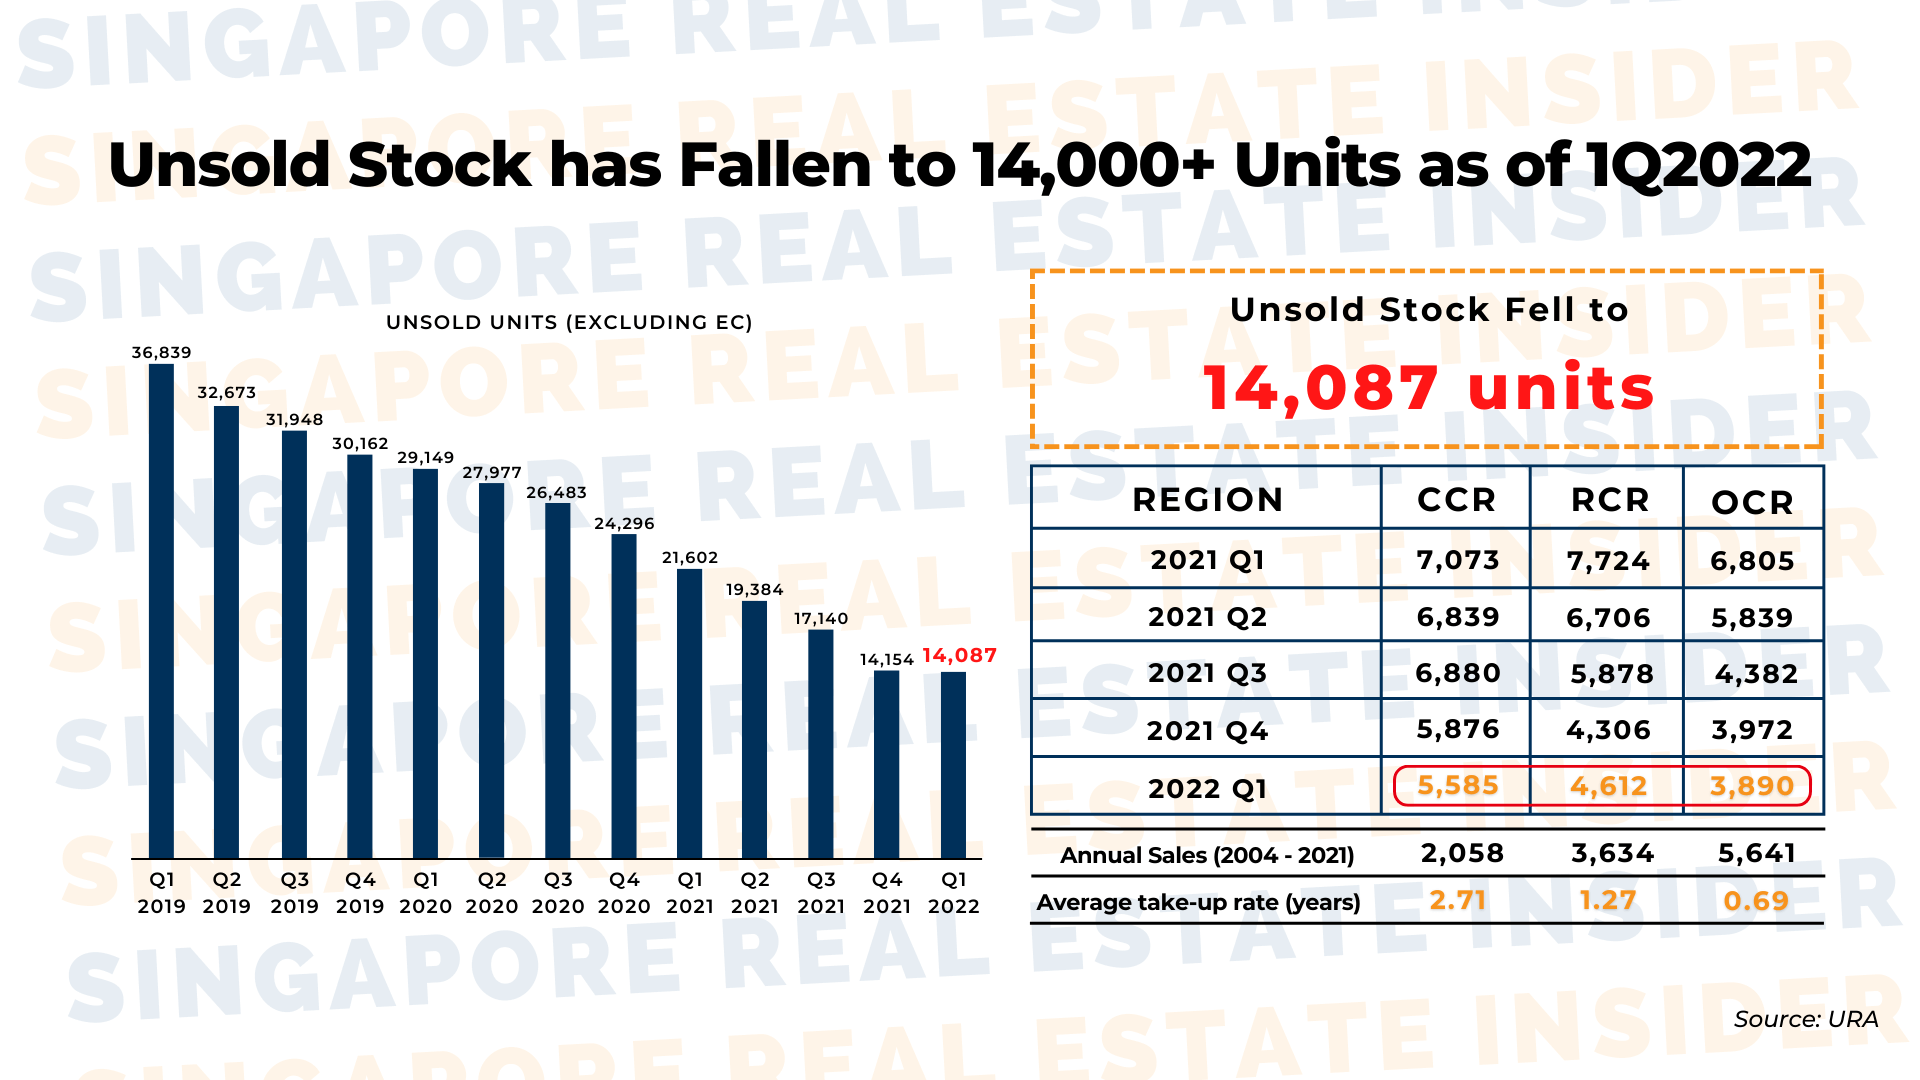 Unsold Stock 1Q 2022